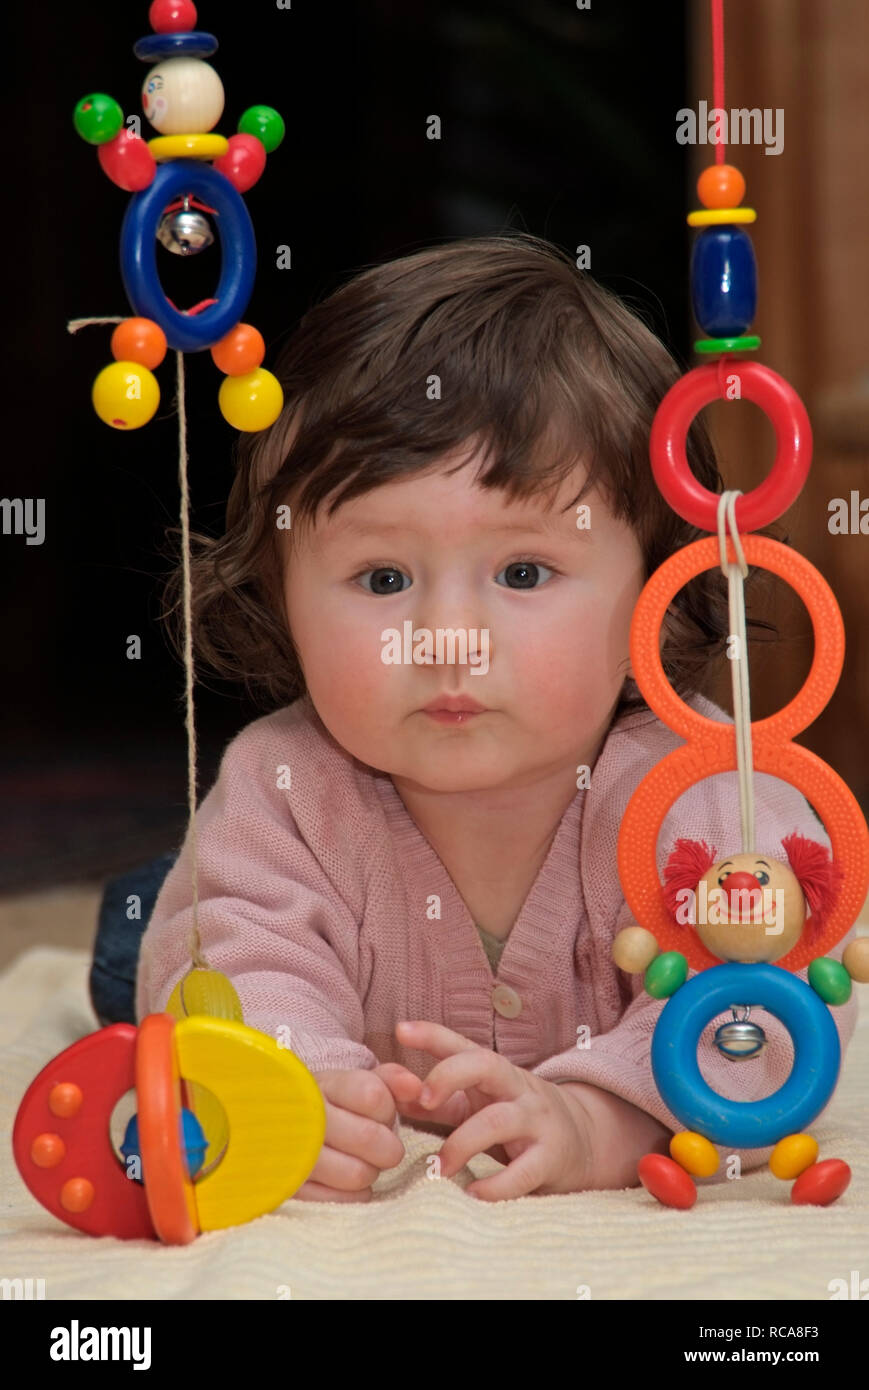 Baby im Zimmer liegt auf dem Boden, Spielzeug | baby lying in a room on the floor, playing with toys Stock Photo